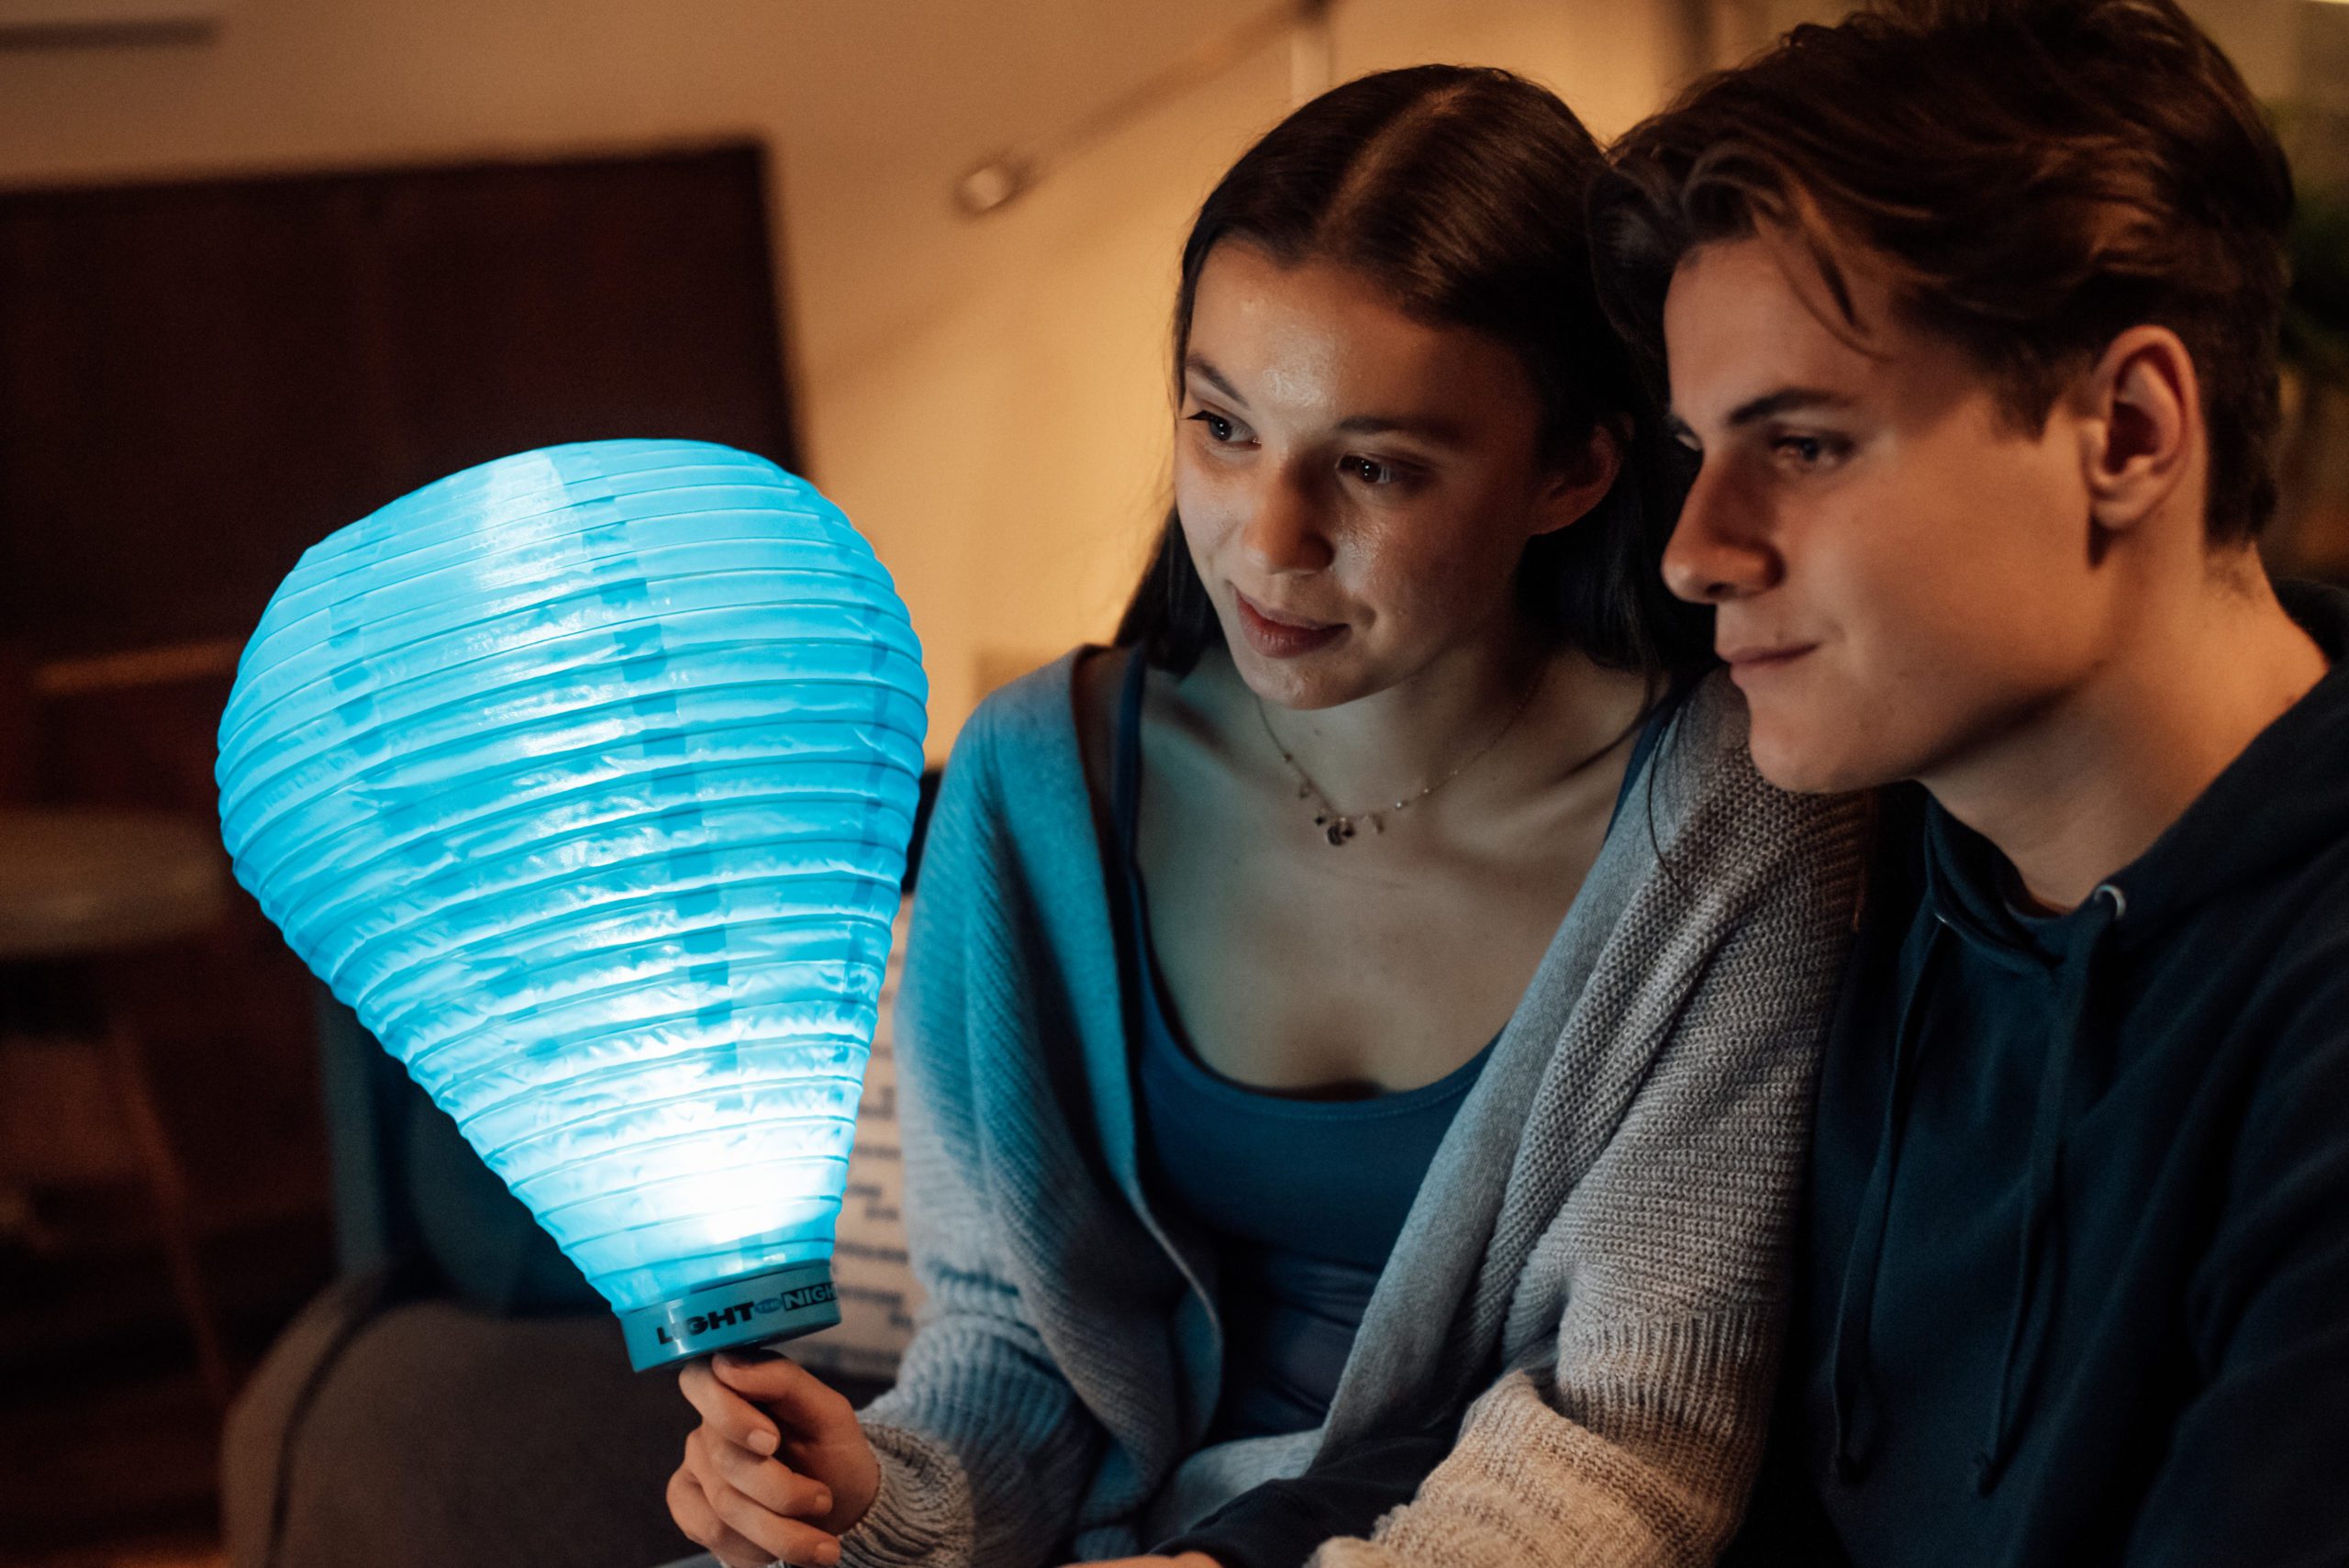 Young woman and man holding a blue Light the Night lantern in their living room